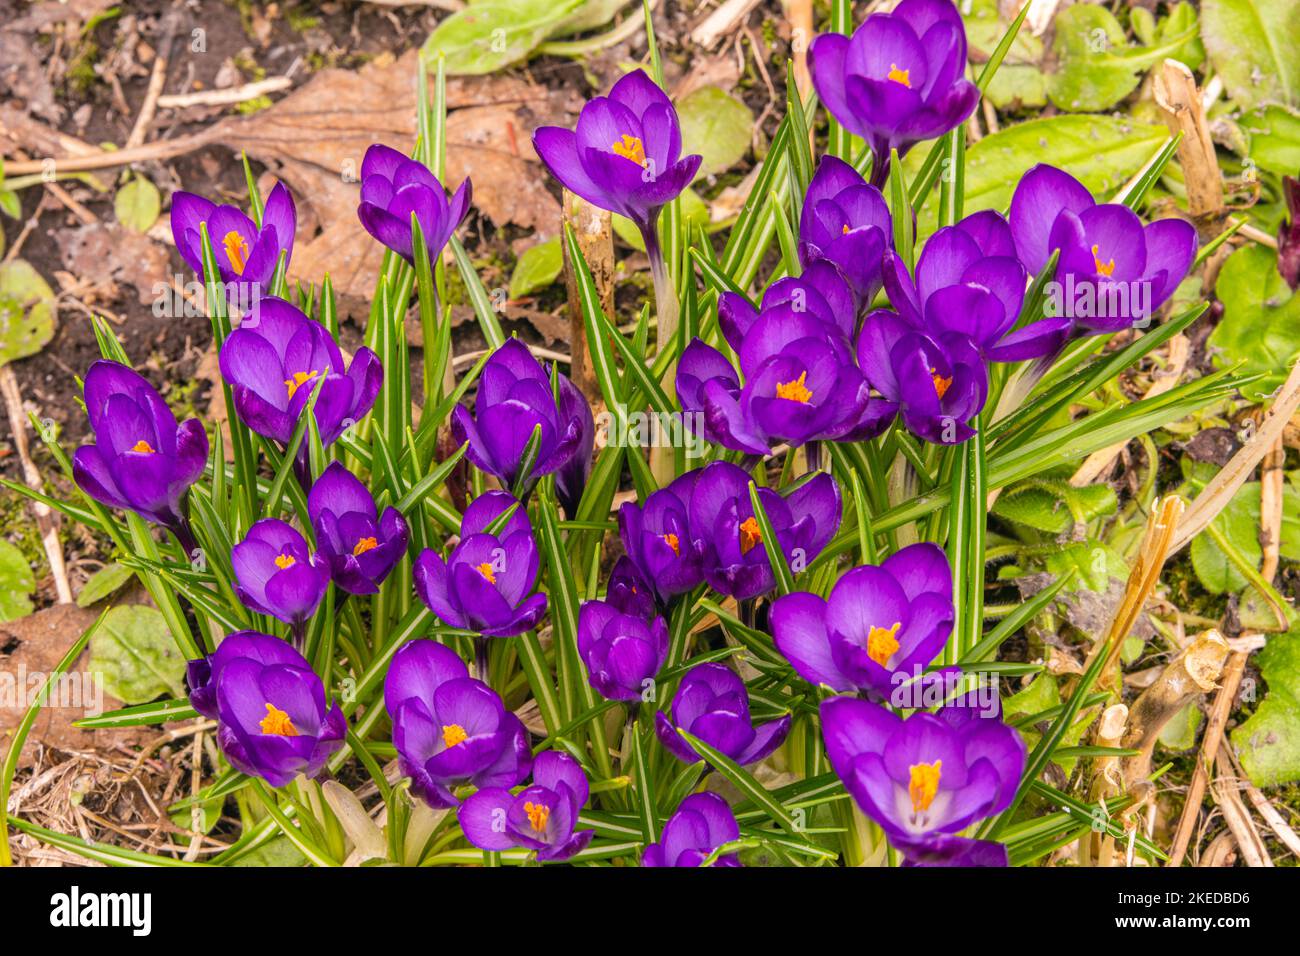 Crocuses emerging and flowering in an early spring garden, Greater Sudbury, Ontario, Canada Stock Photo